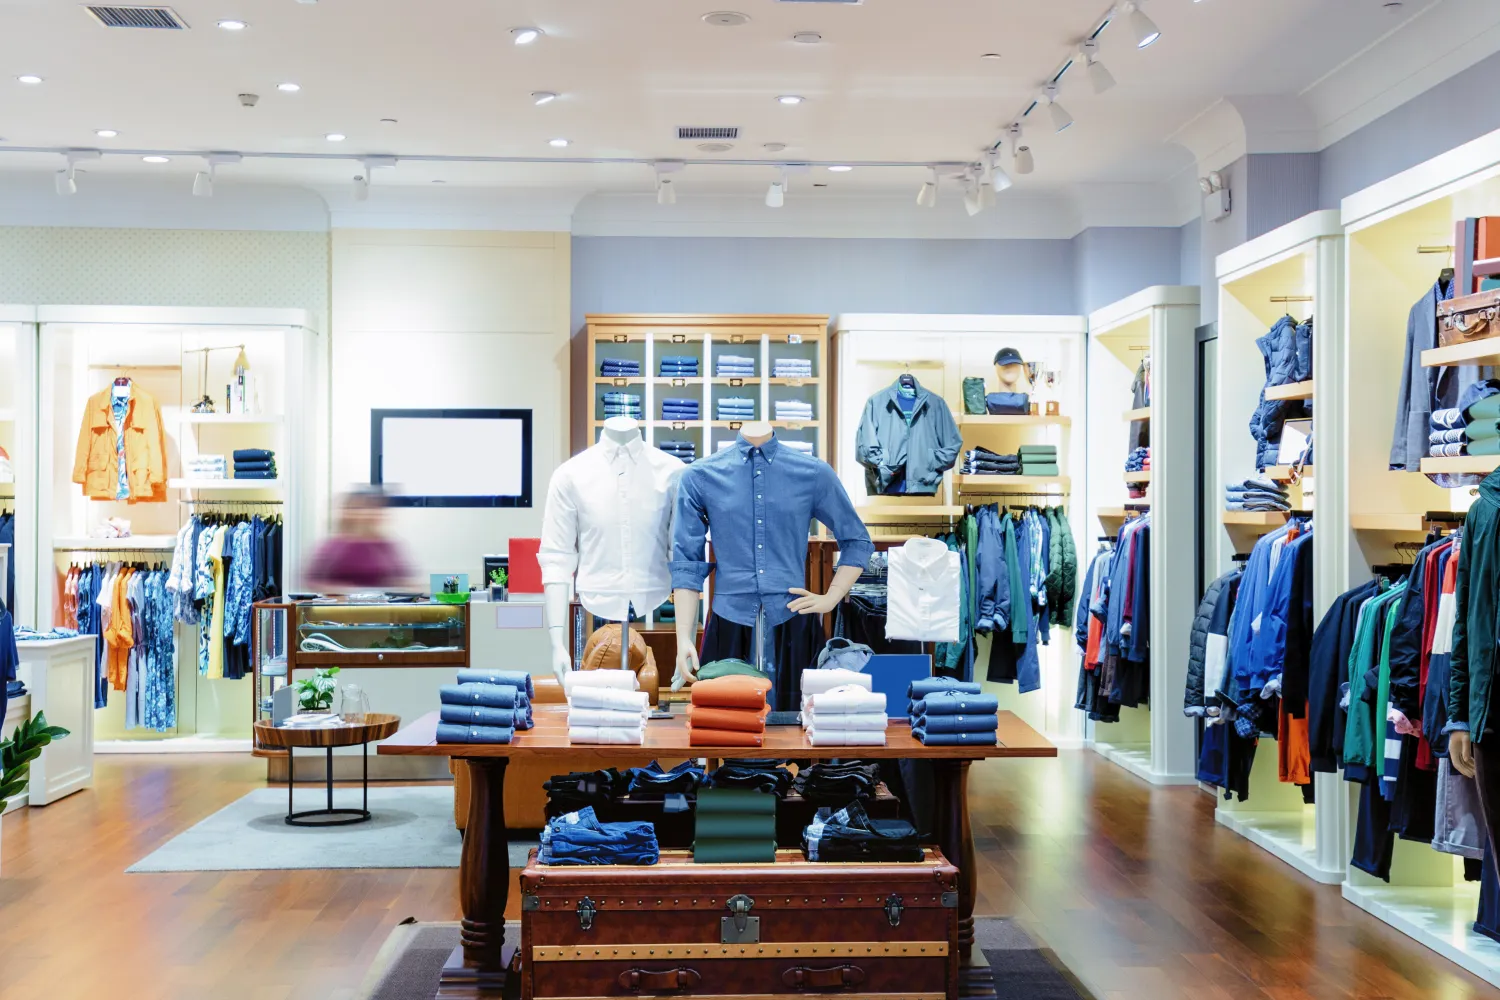 Top CX Trends in Retail | Awesome CX